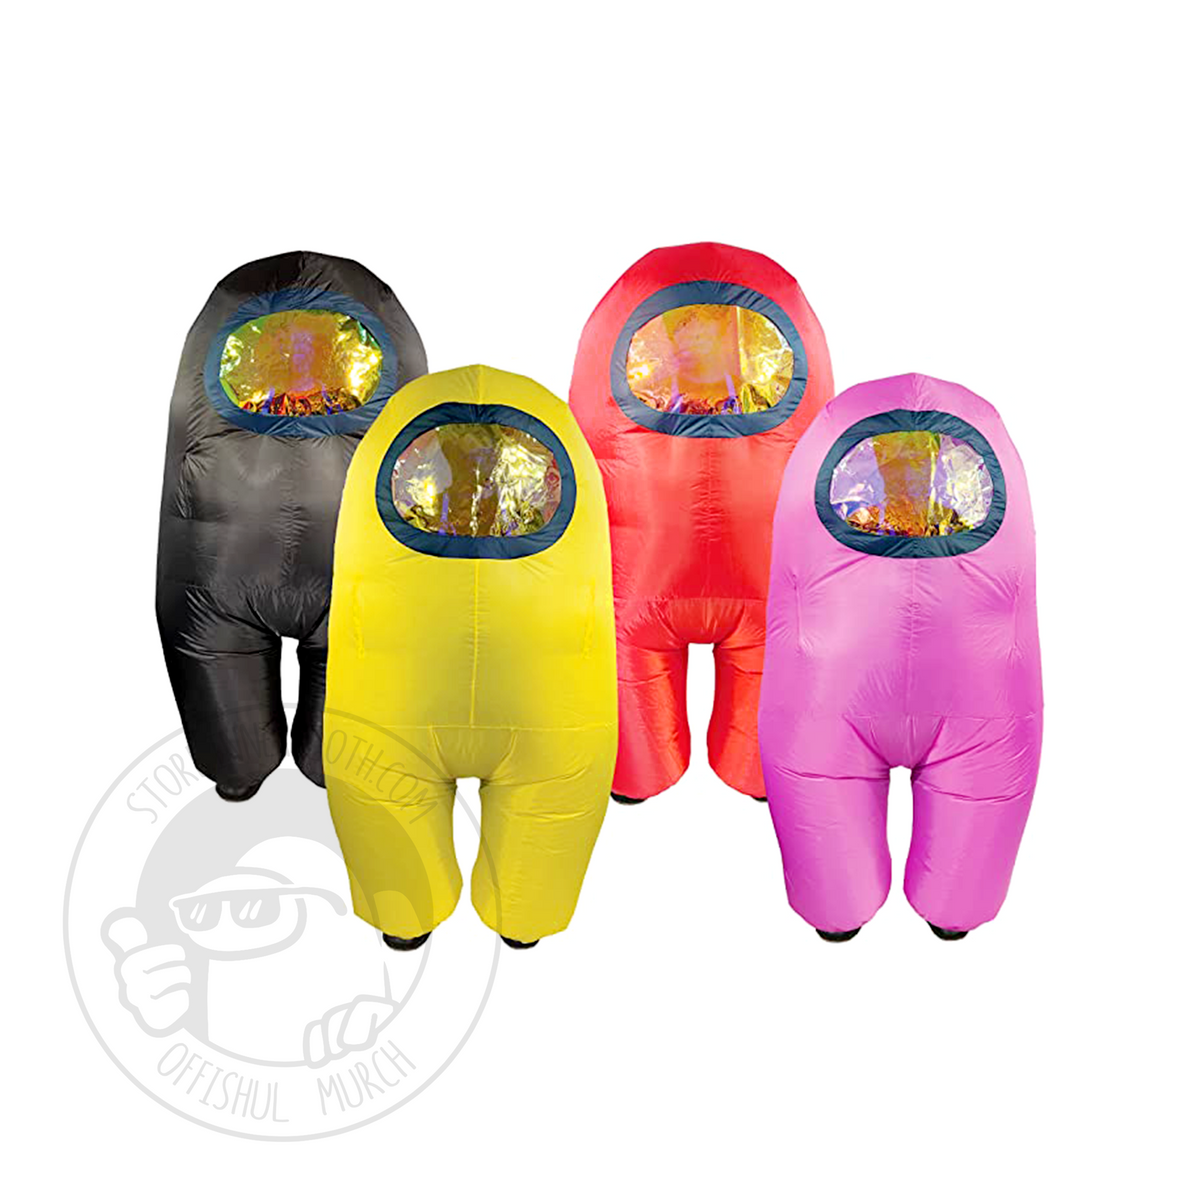 Front View group shot of the black, yellow, red, and pink adult-sized inflatable Crewmate costumes. The Crewmate visors are made of a tinted material to obscure the wearer&#39;s face. 